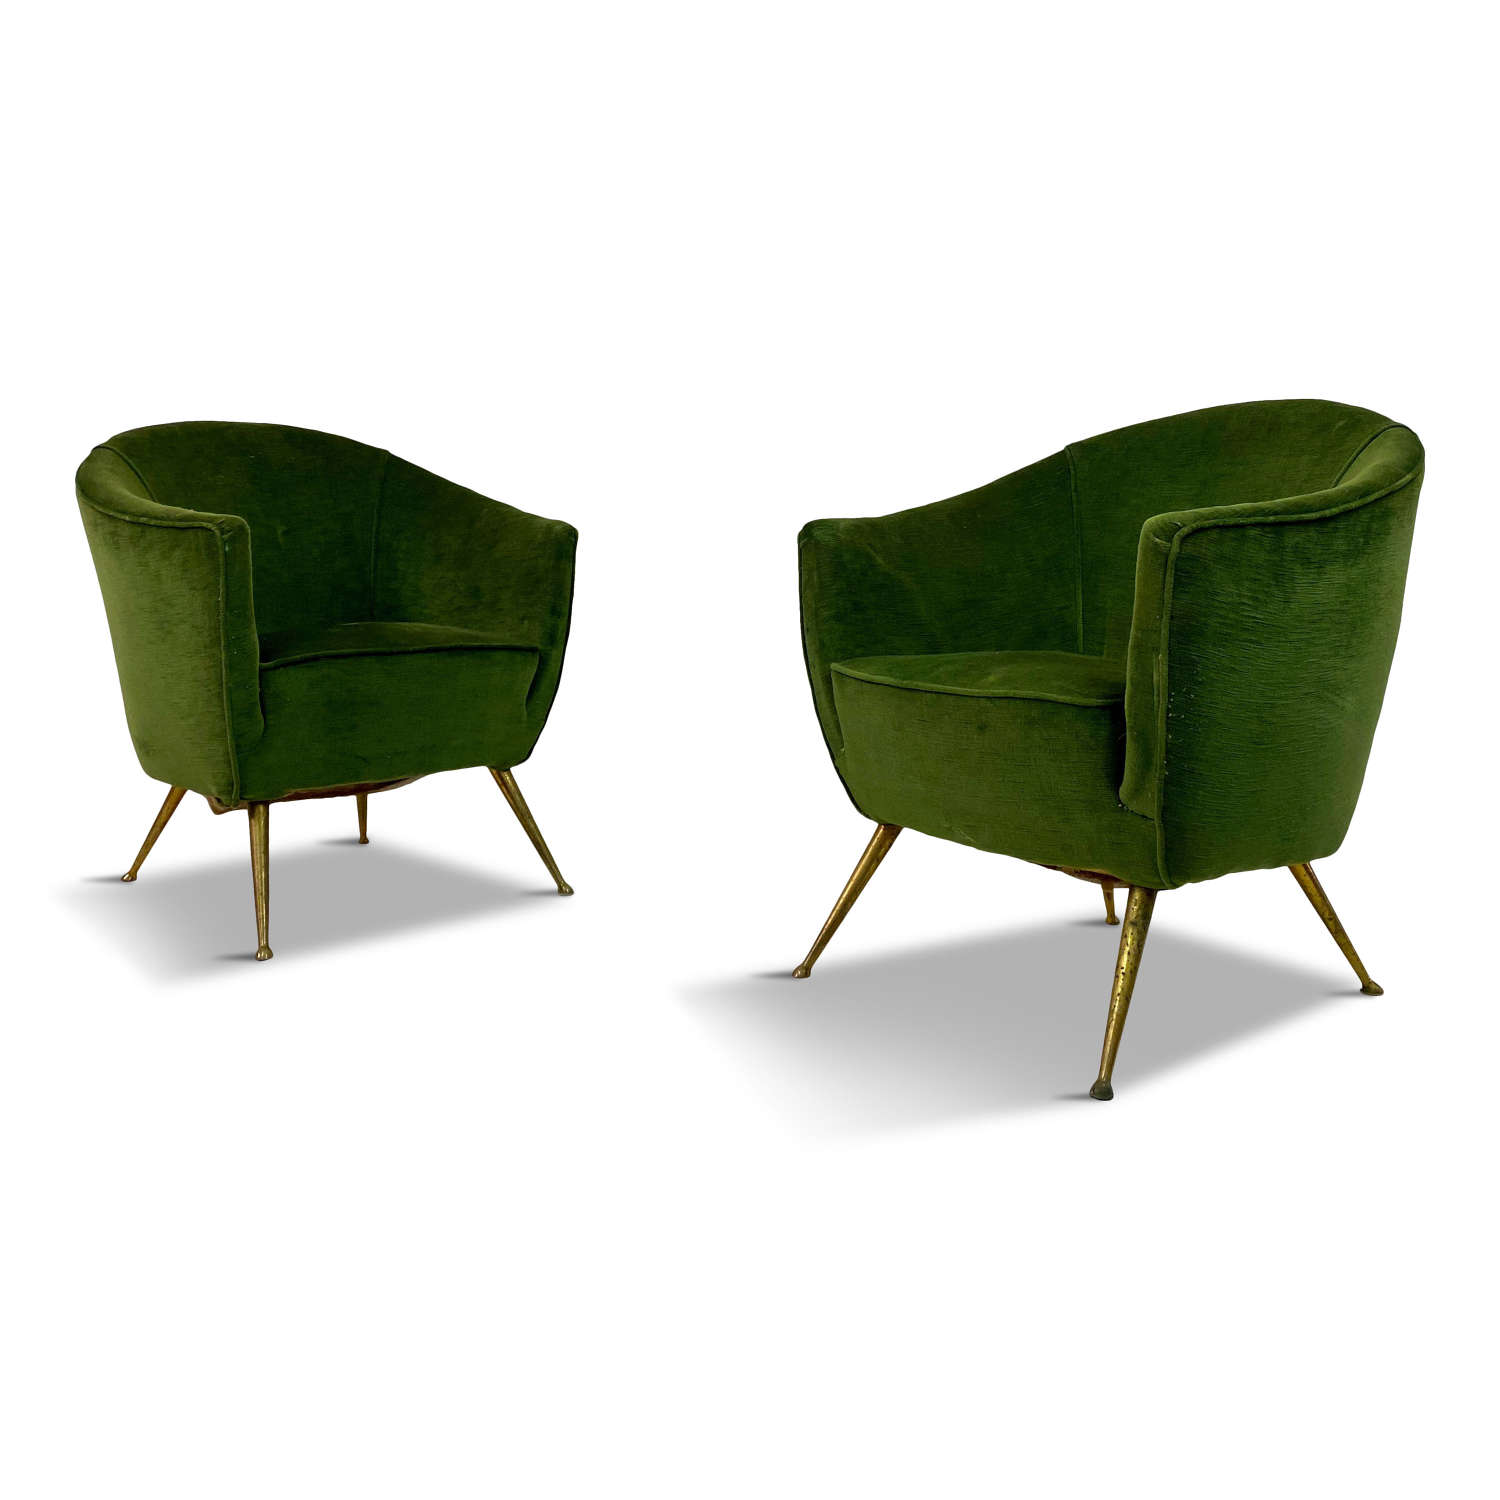 Pair of 1950s Italian Armchairs in Green